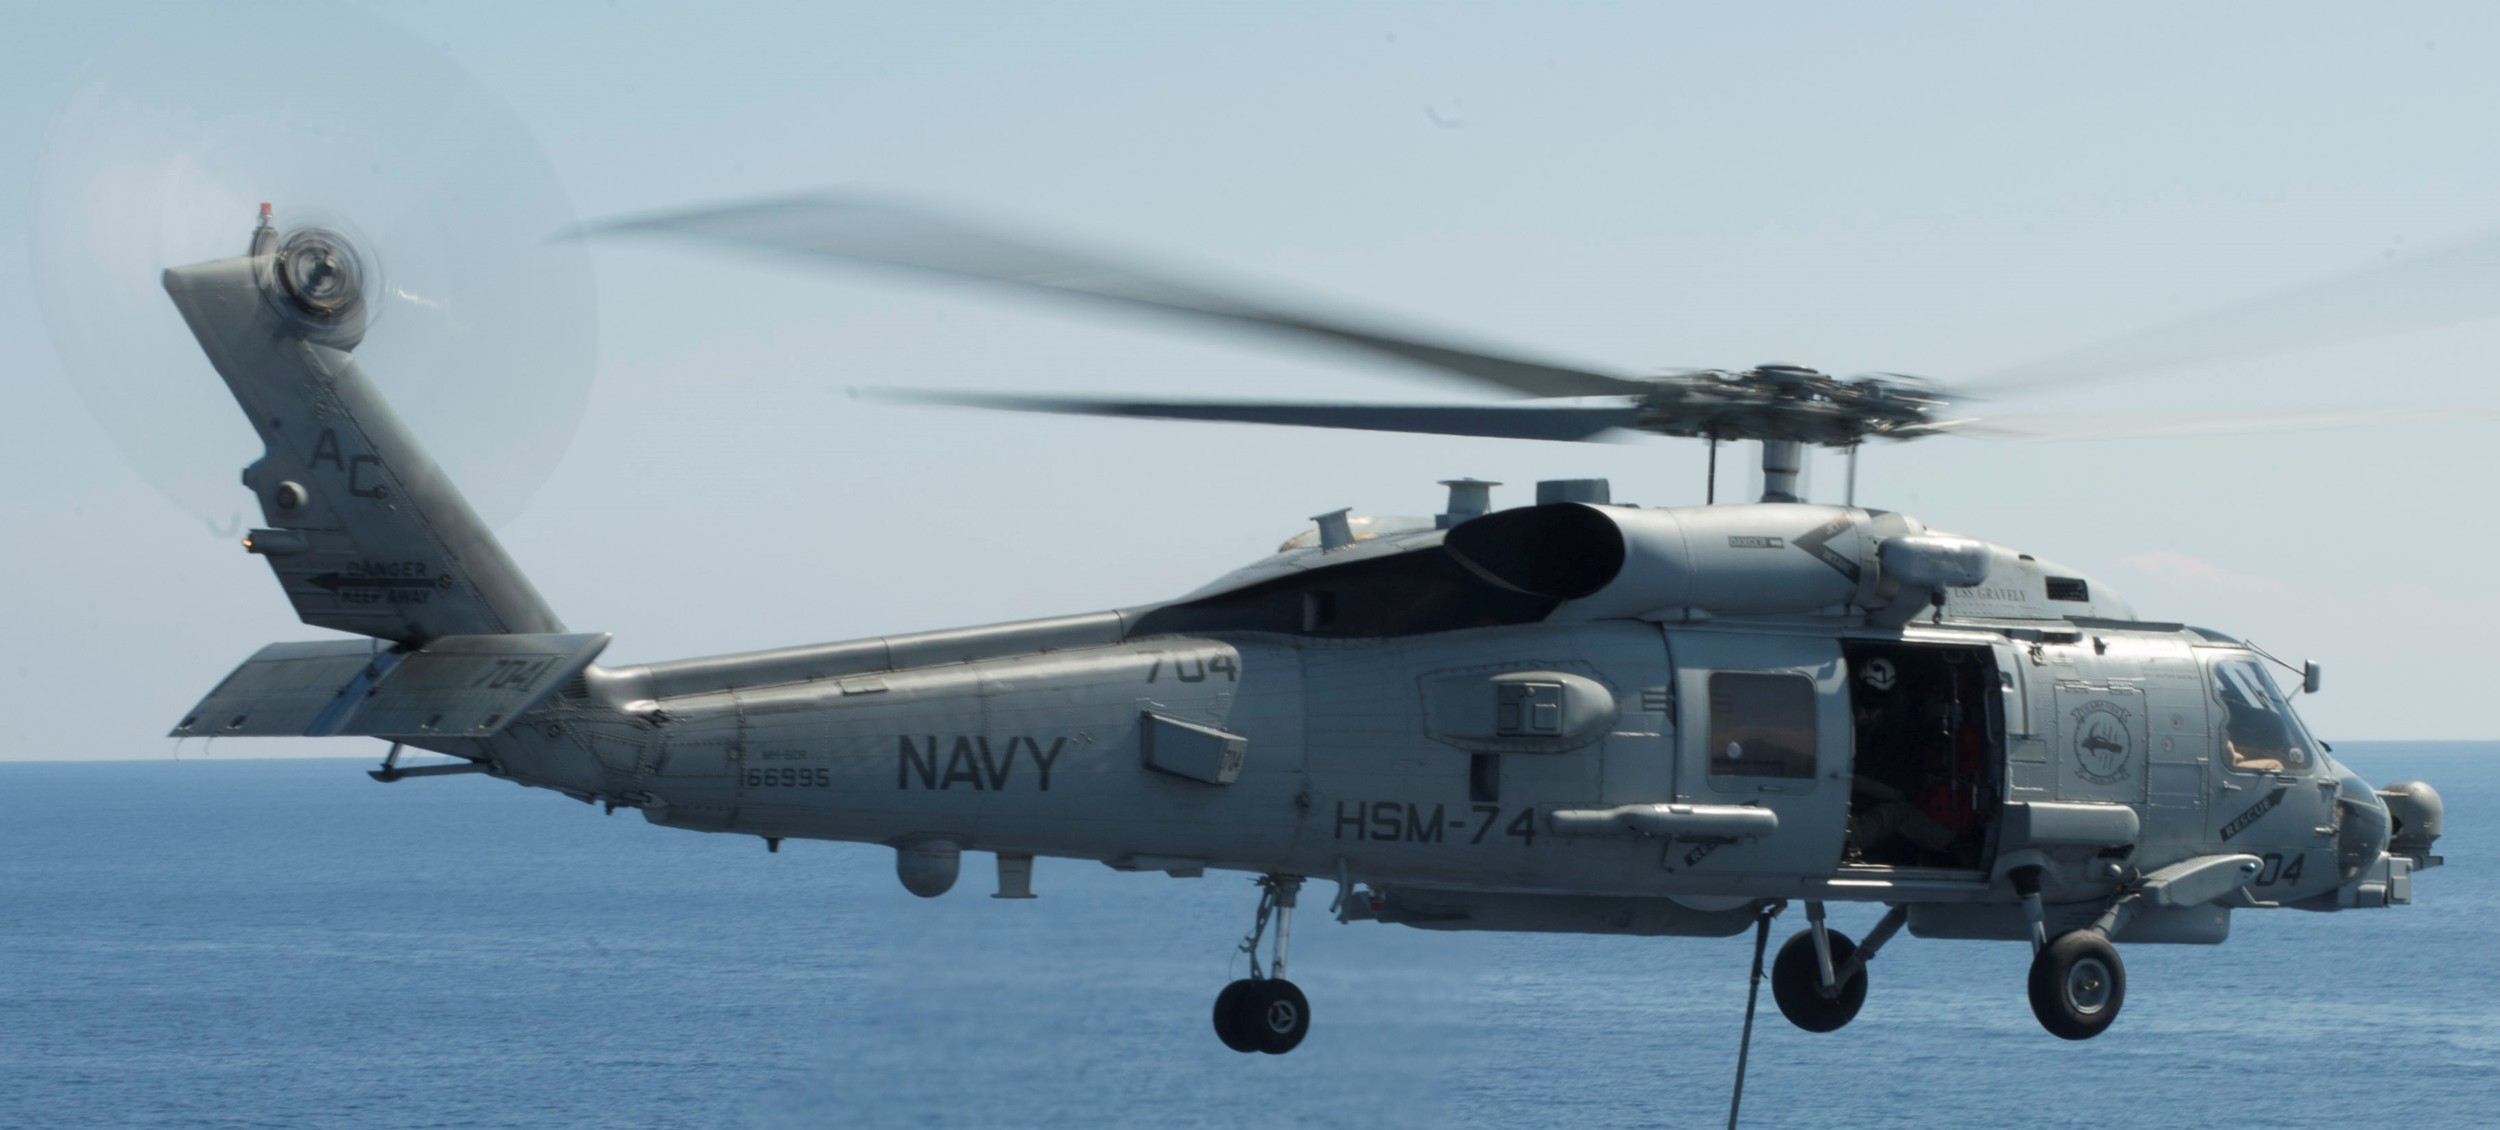 hsm-74 swamp foxes helicopter maritime strike squadron us navy mh-60r seahawk 2013 30